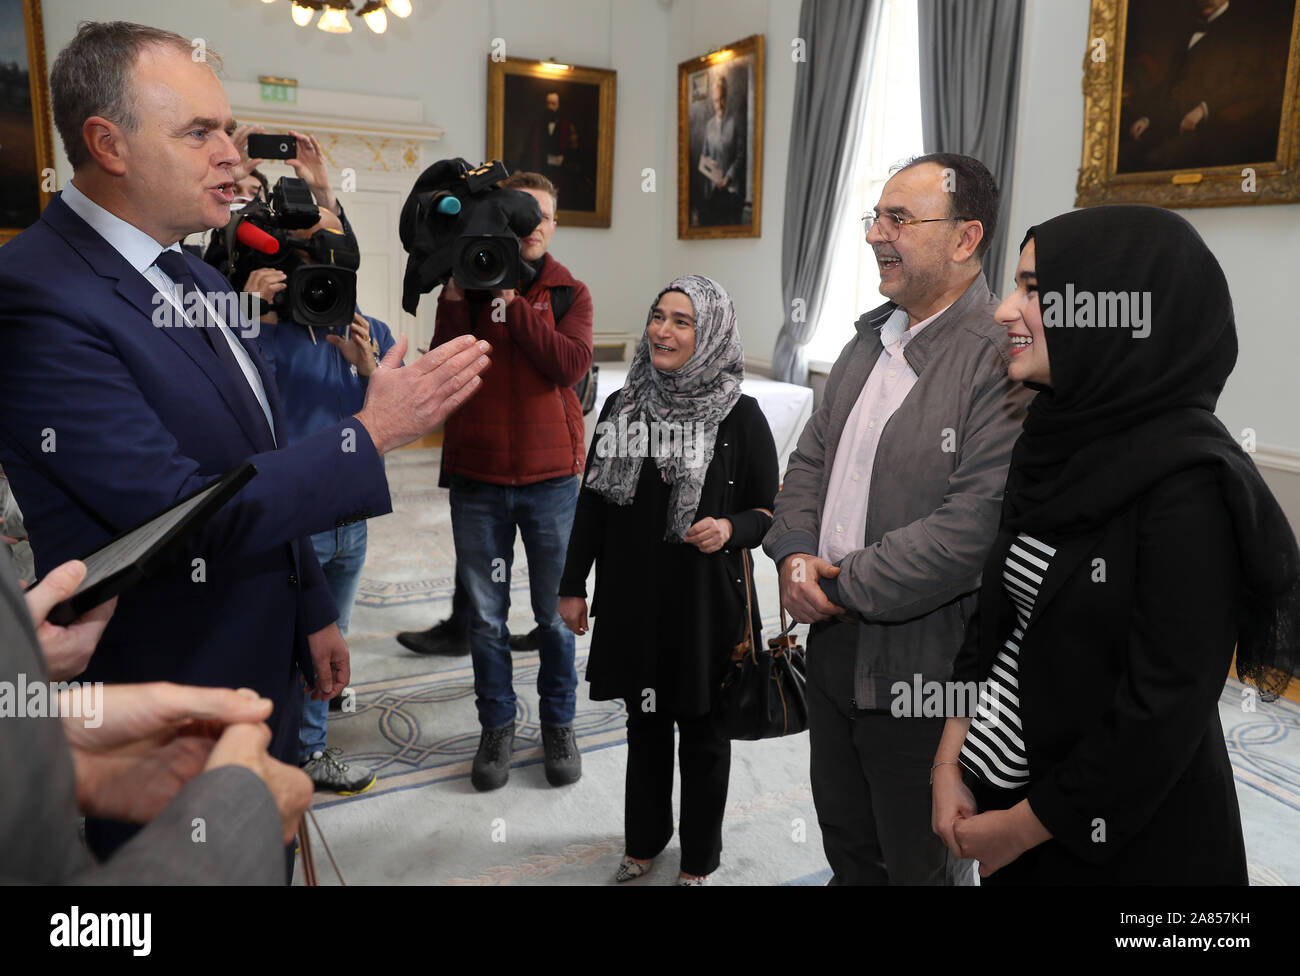 Minister for Education Joe McHugh (left) speaking with RCSI medical student Suaad Alshleh (right), her mother We Sam Jouma and father Issam Alshleh at the Royal College of Surgeons Ireland in Dublin. Suaad was presented with the inaugral Professor William C Campbell Bursary which recognises the work of the Donegal Nobel Prize winner. Stock Photo